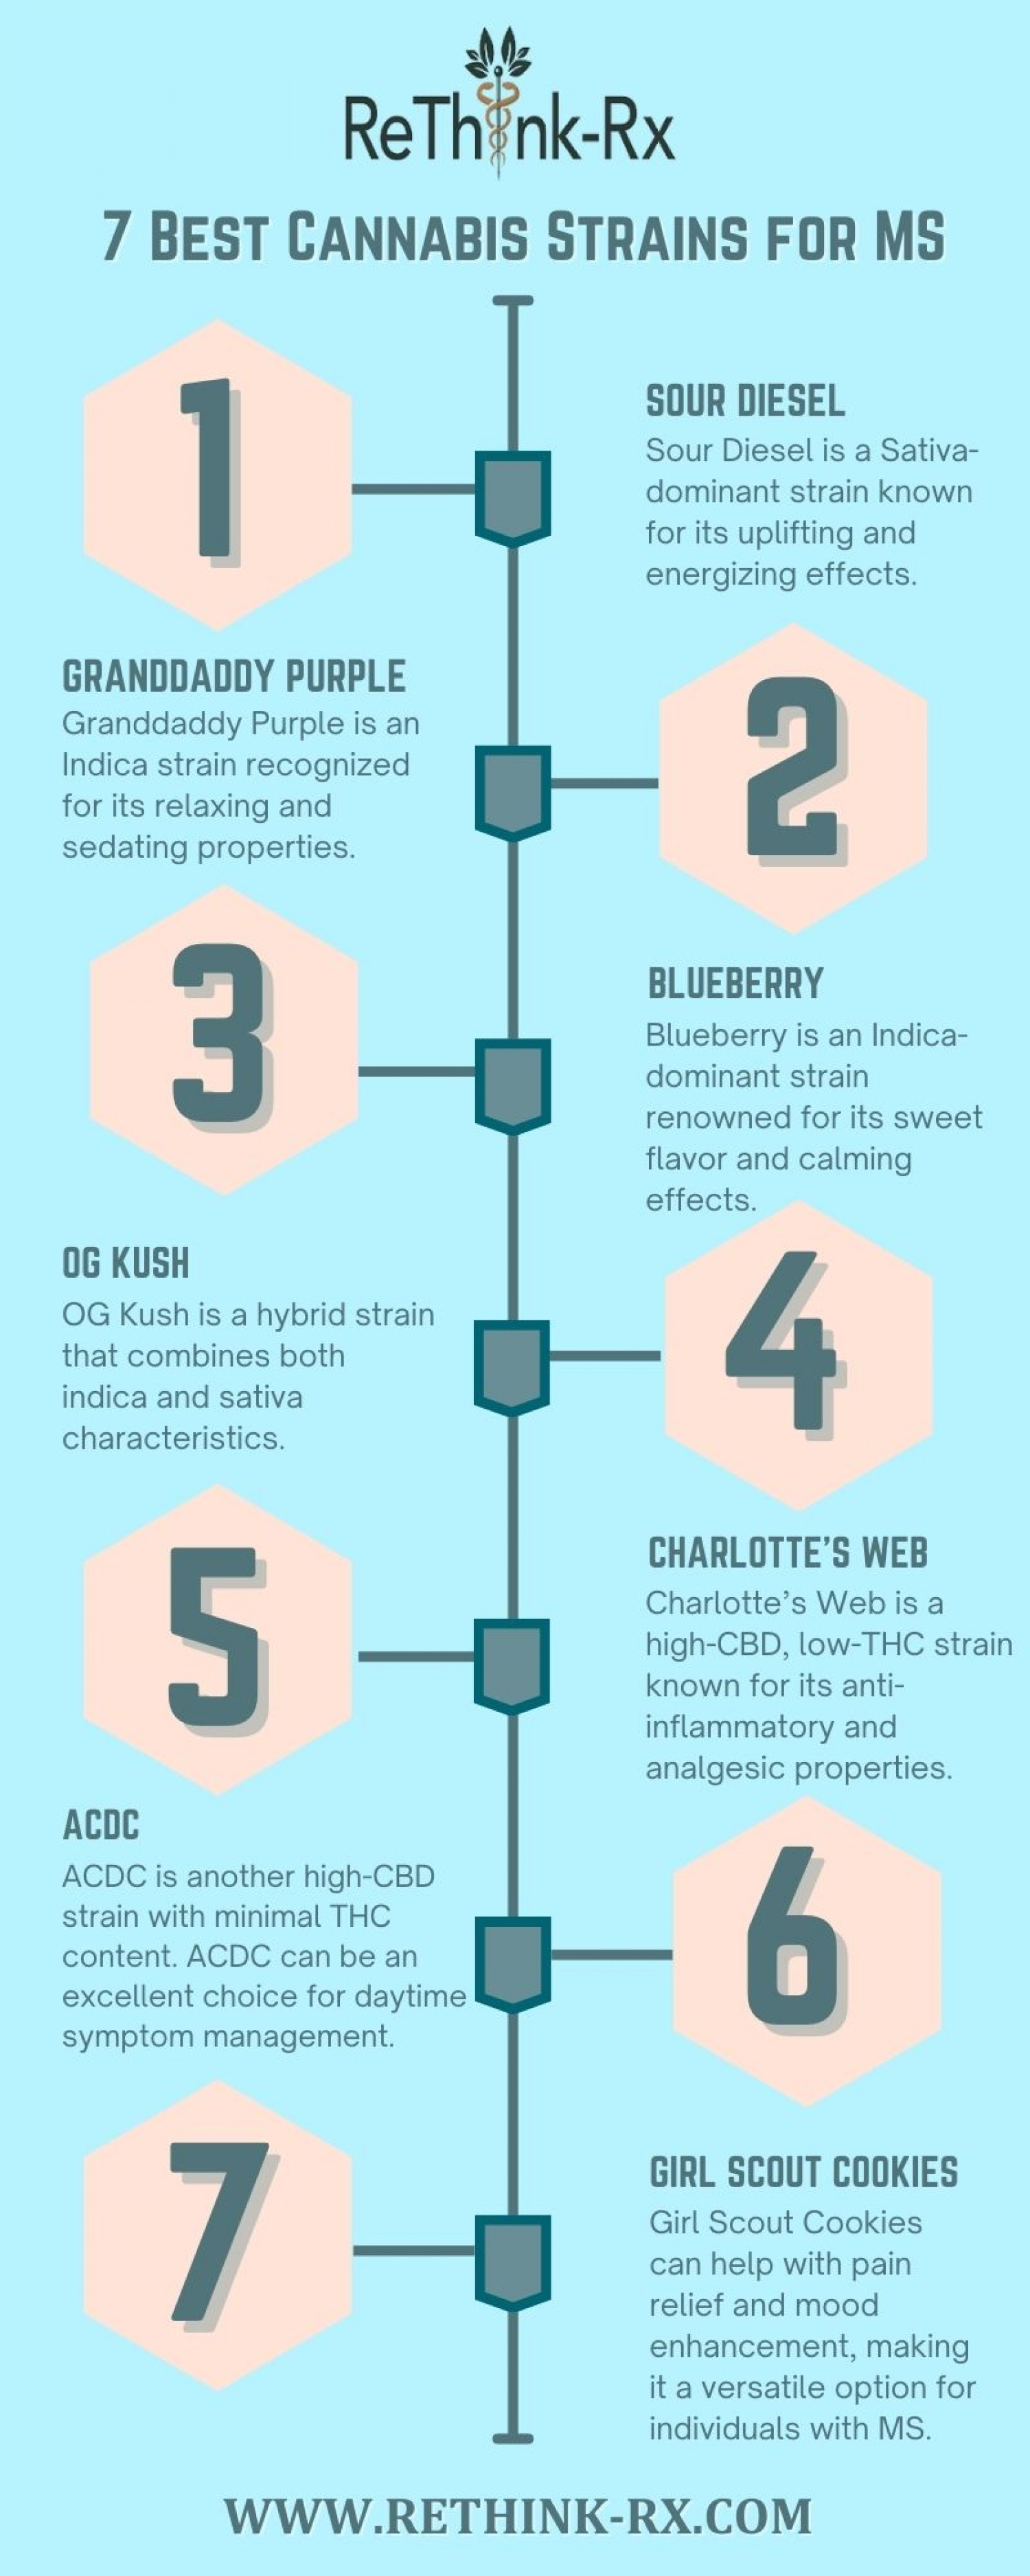 Best Cannabis Strains for Multiple Sclerosis - ReThink-Rx Infographic